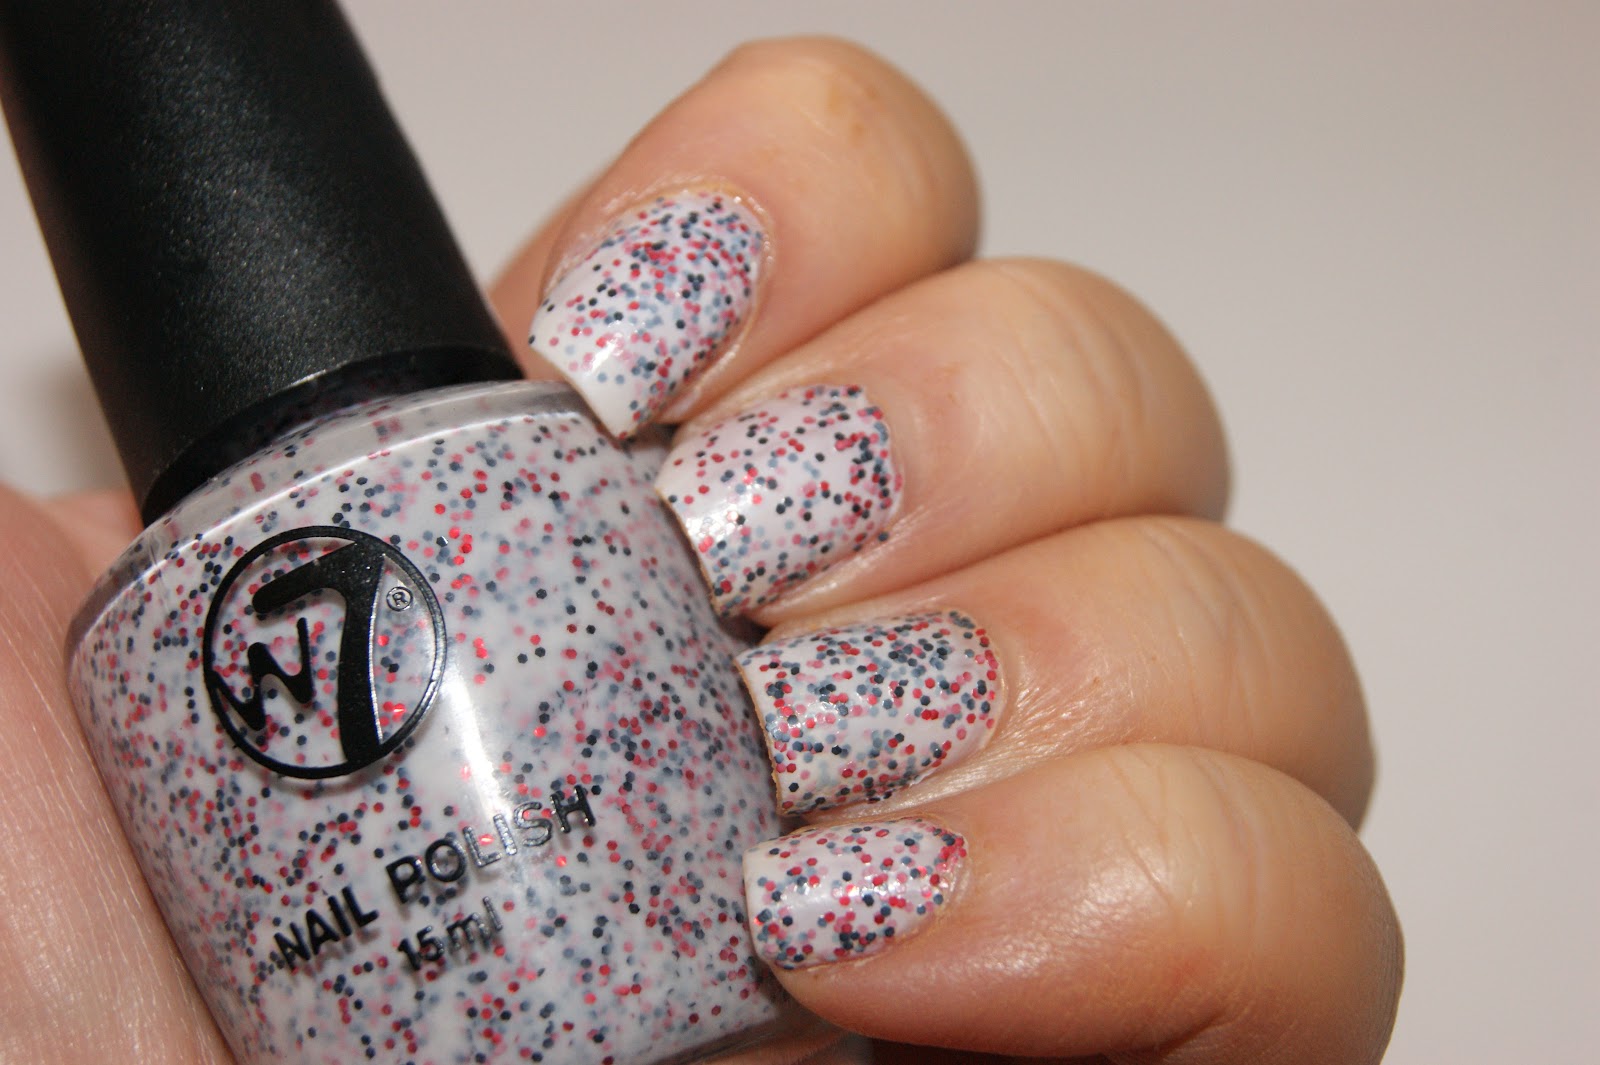 Orly Simply Petals Silver & Iridescent Glitter Holographic Unicorn